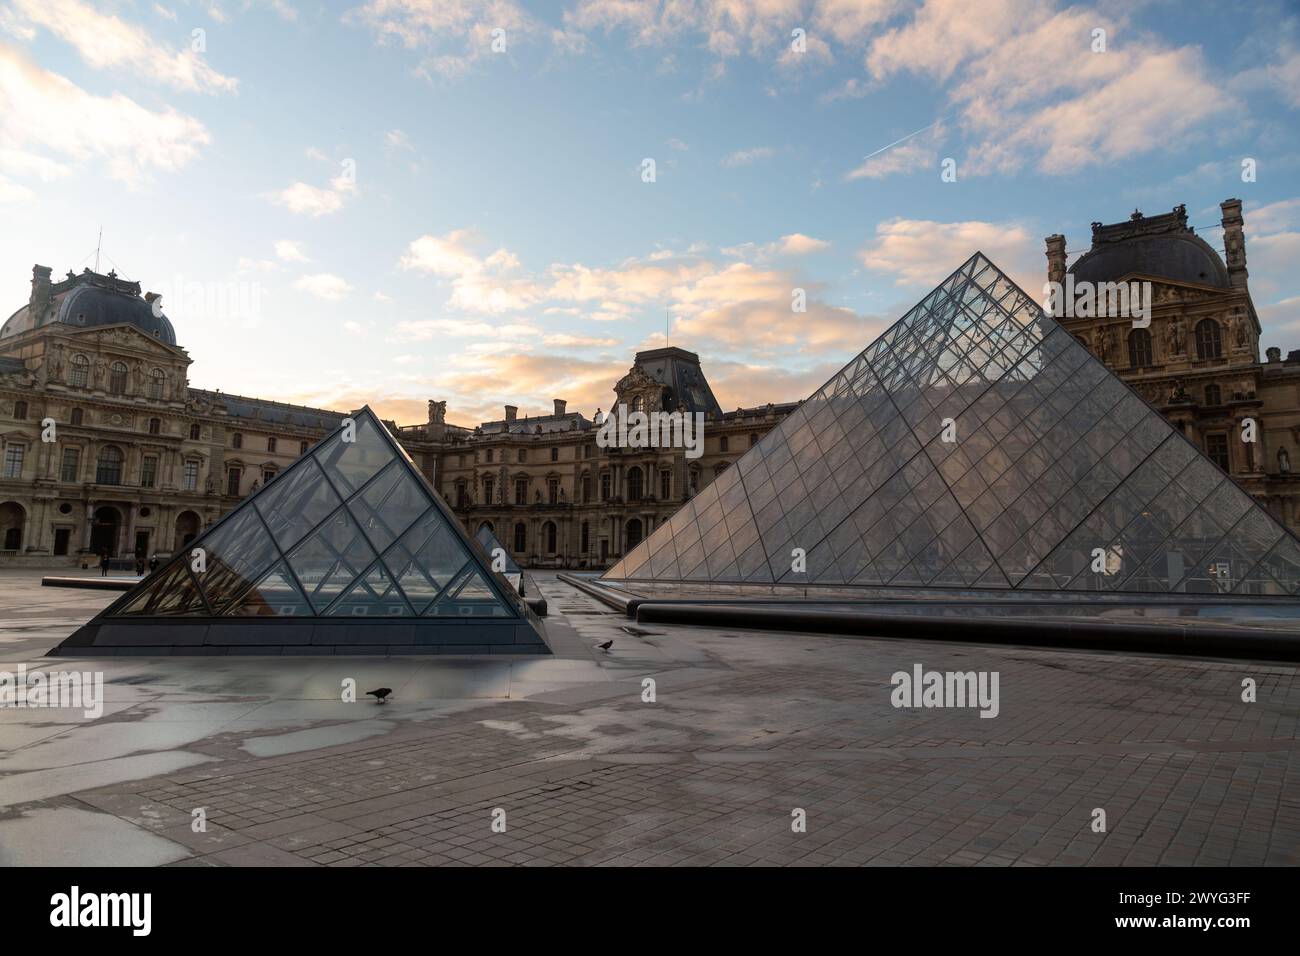 Paris, France - JAN 20, 2022: The glass pyramid of Louvre Museum, the main entrance to famous museum and gallery, completed in 1989. Stock Photo